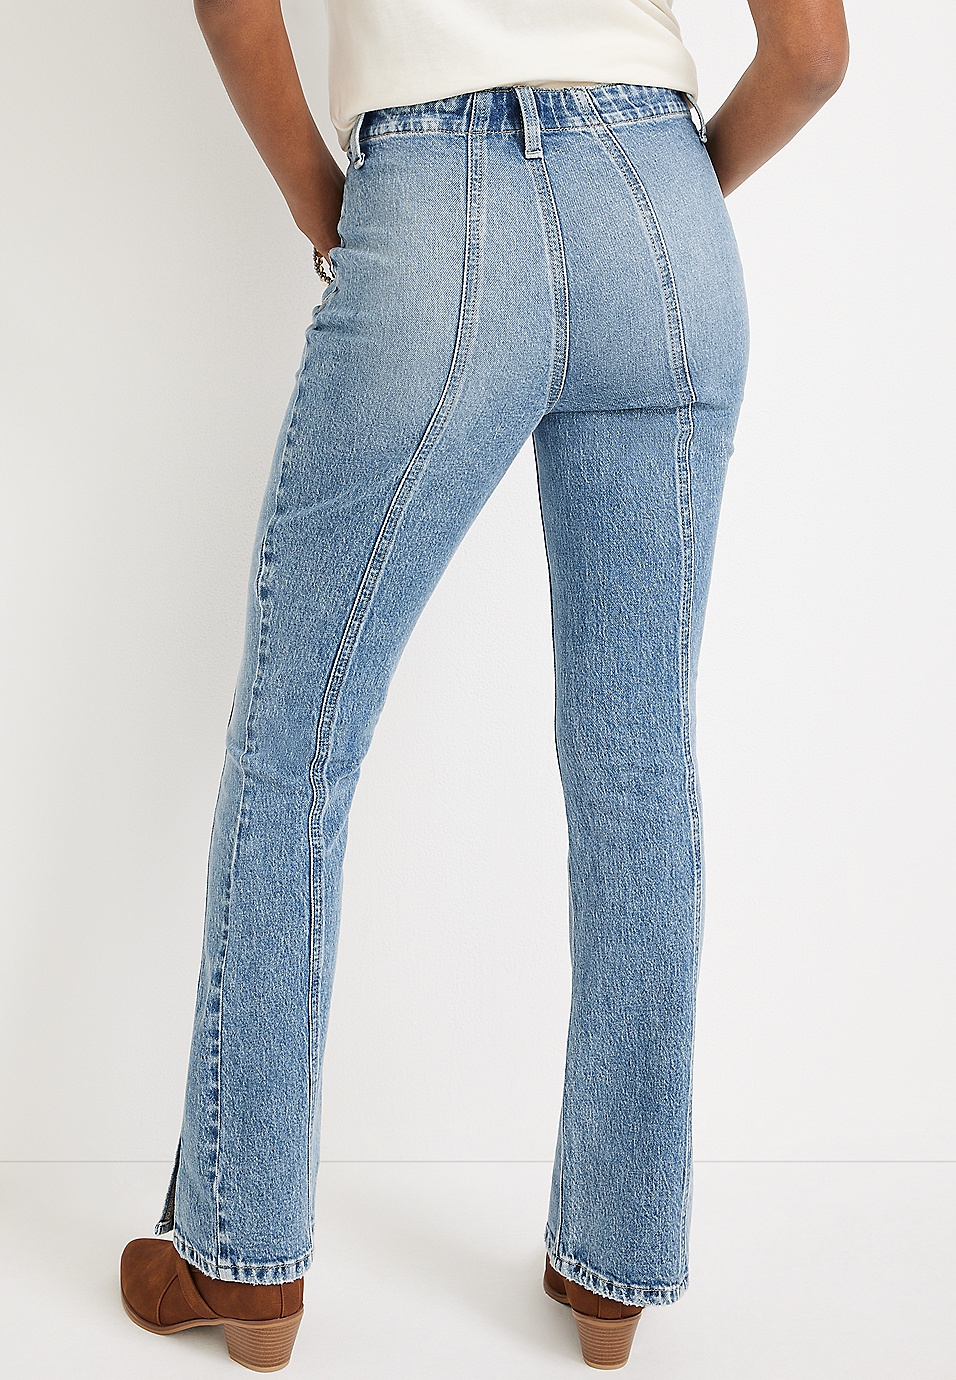 Girls Denim Ankle Jeans with Front Seam & Slit